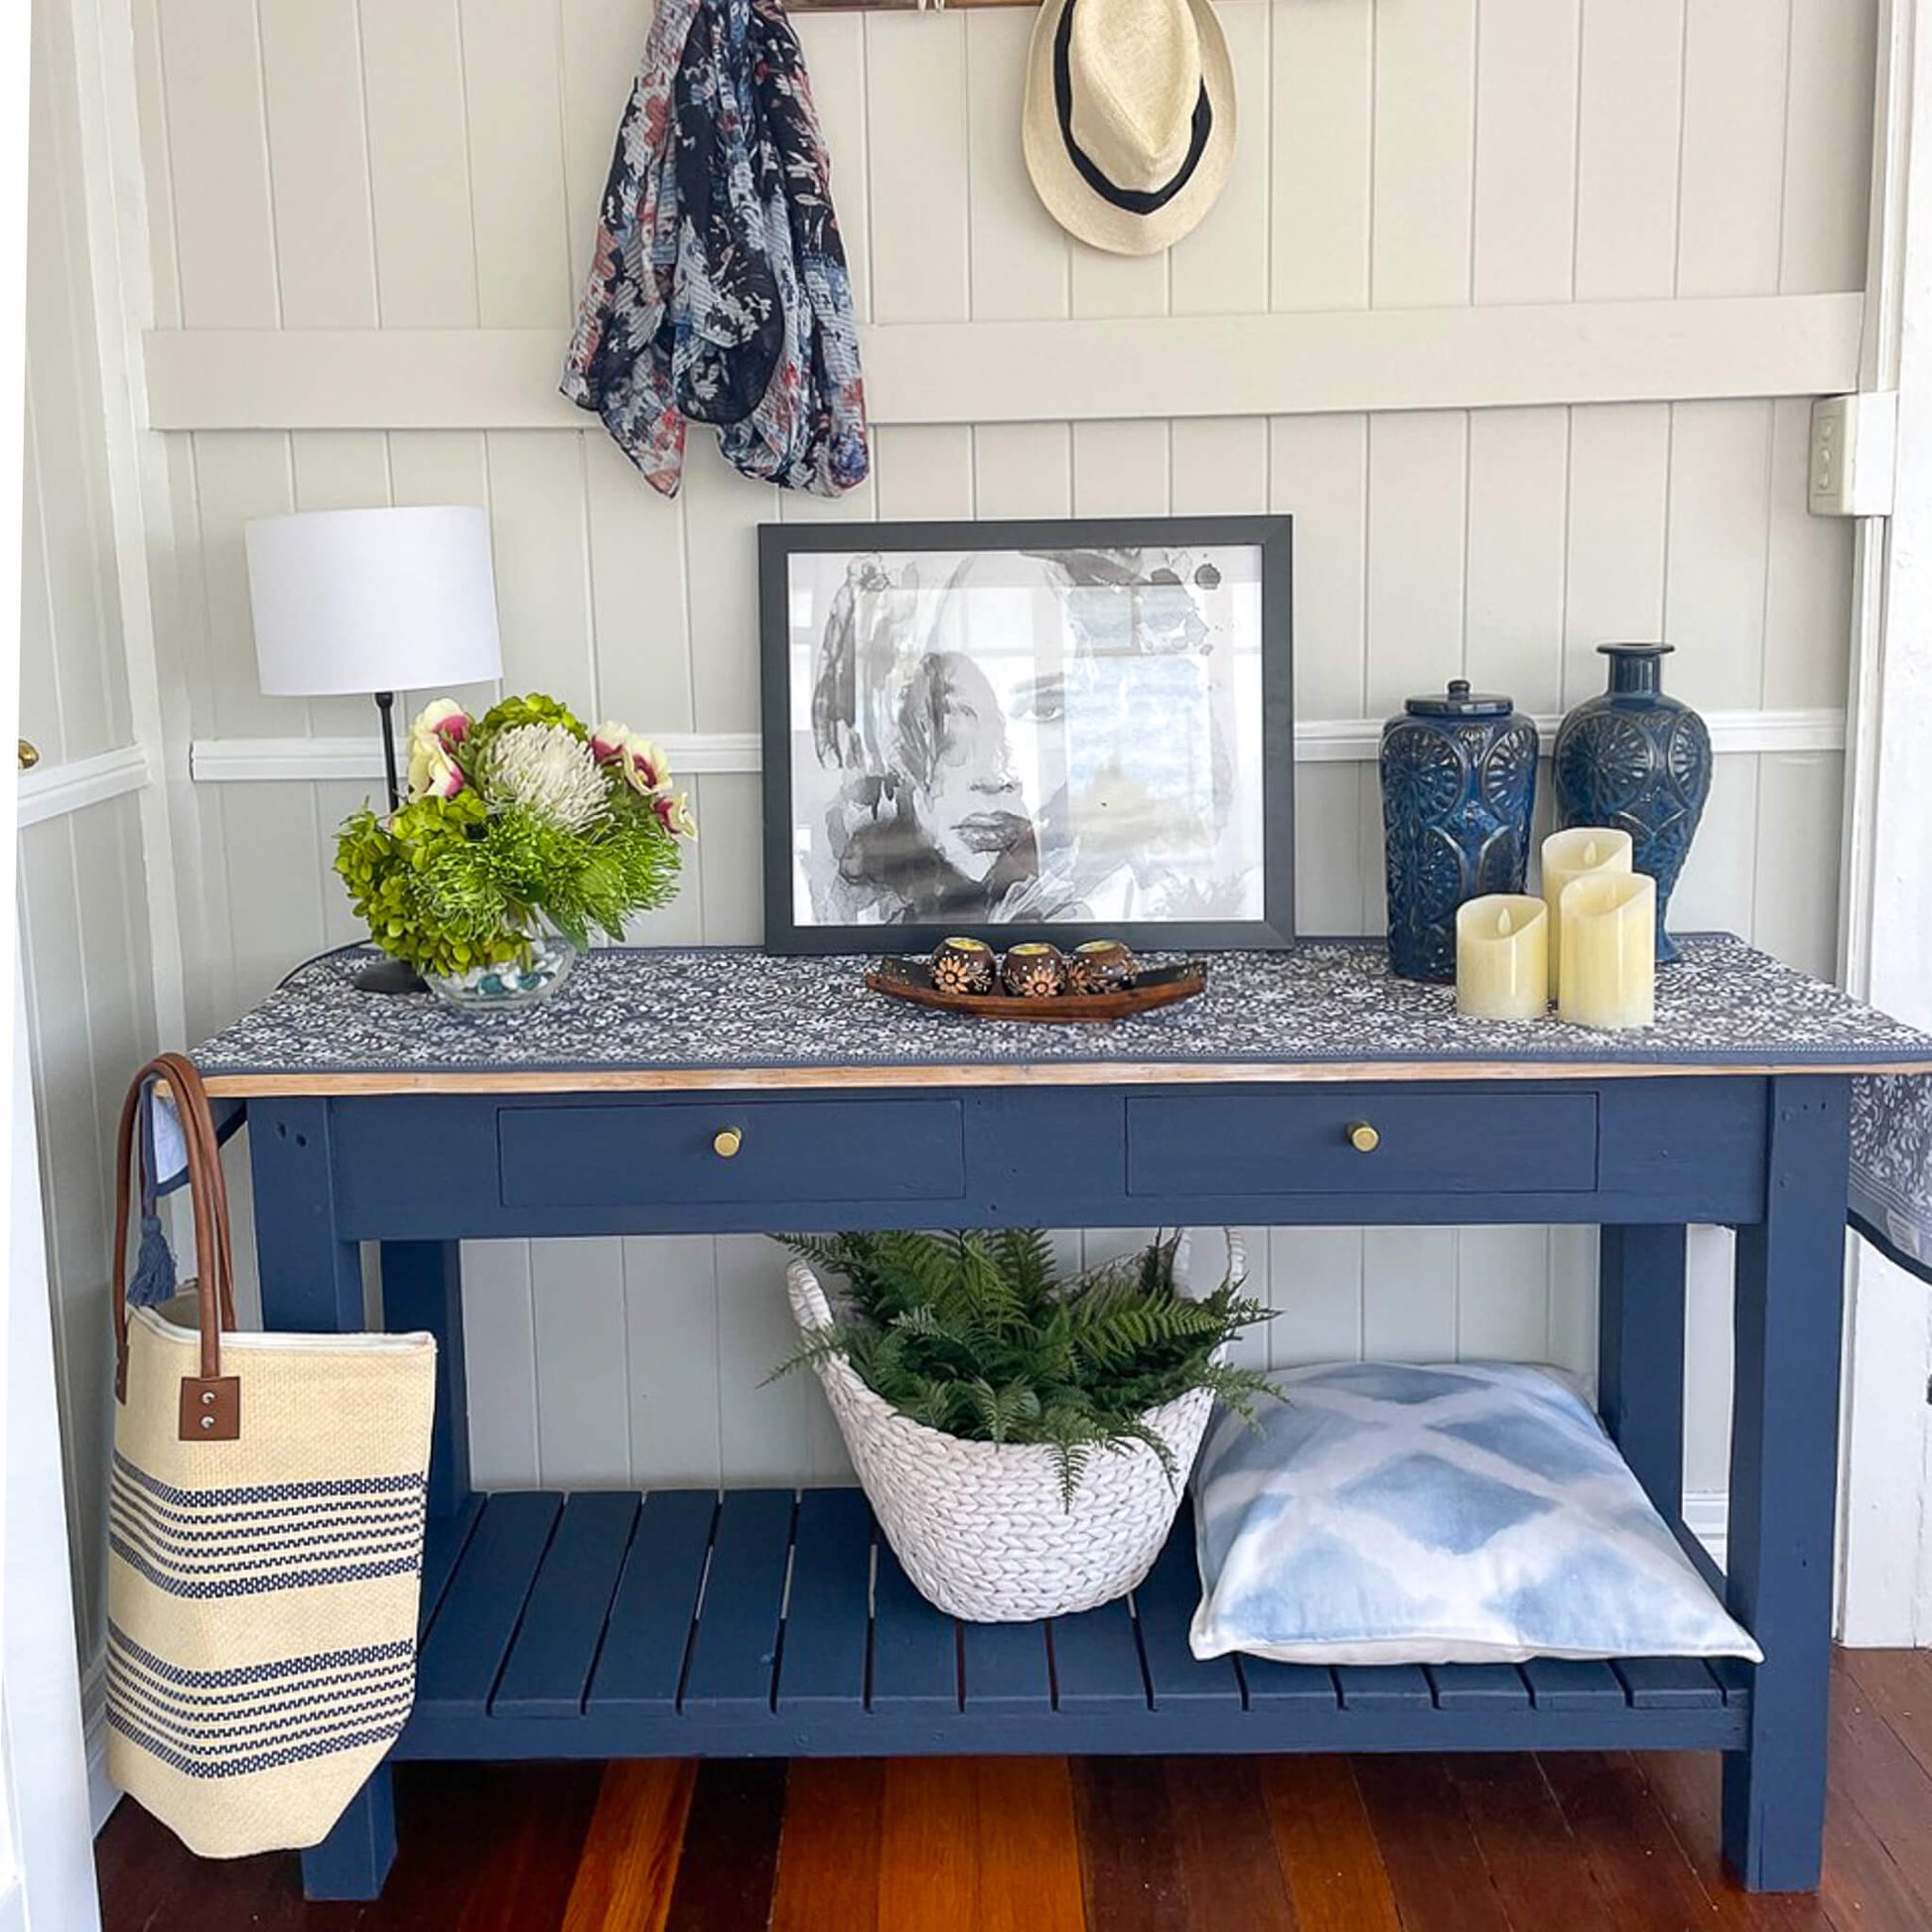 Timber console painted with  Blake & Taylor Ink Navy Chalk Furniture Paint